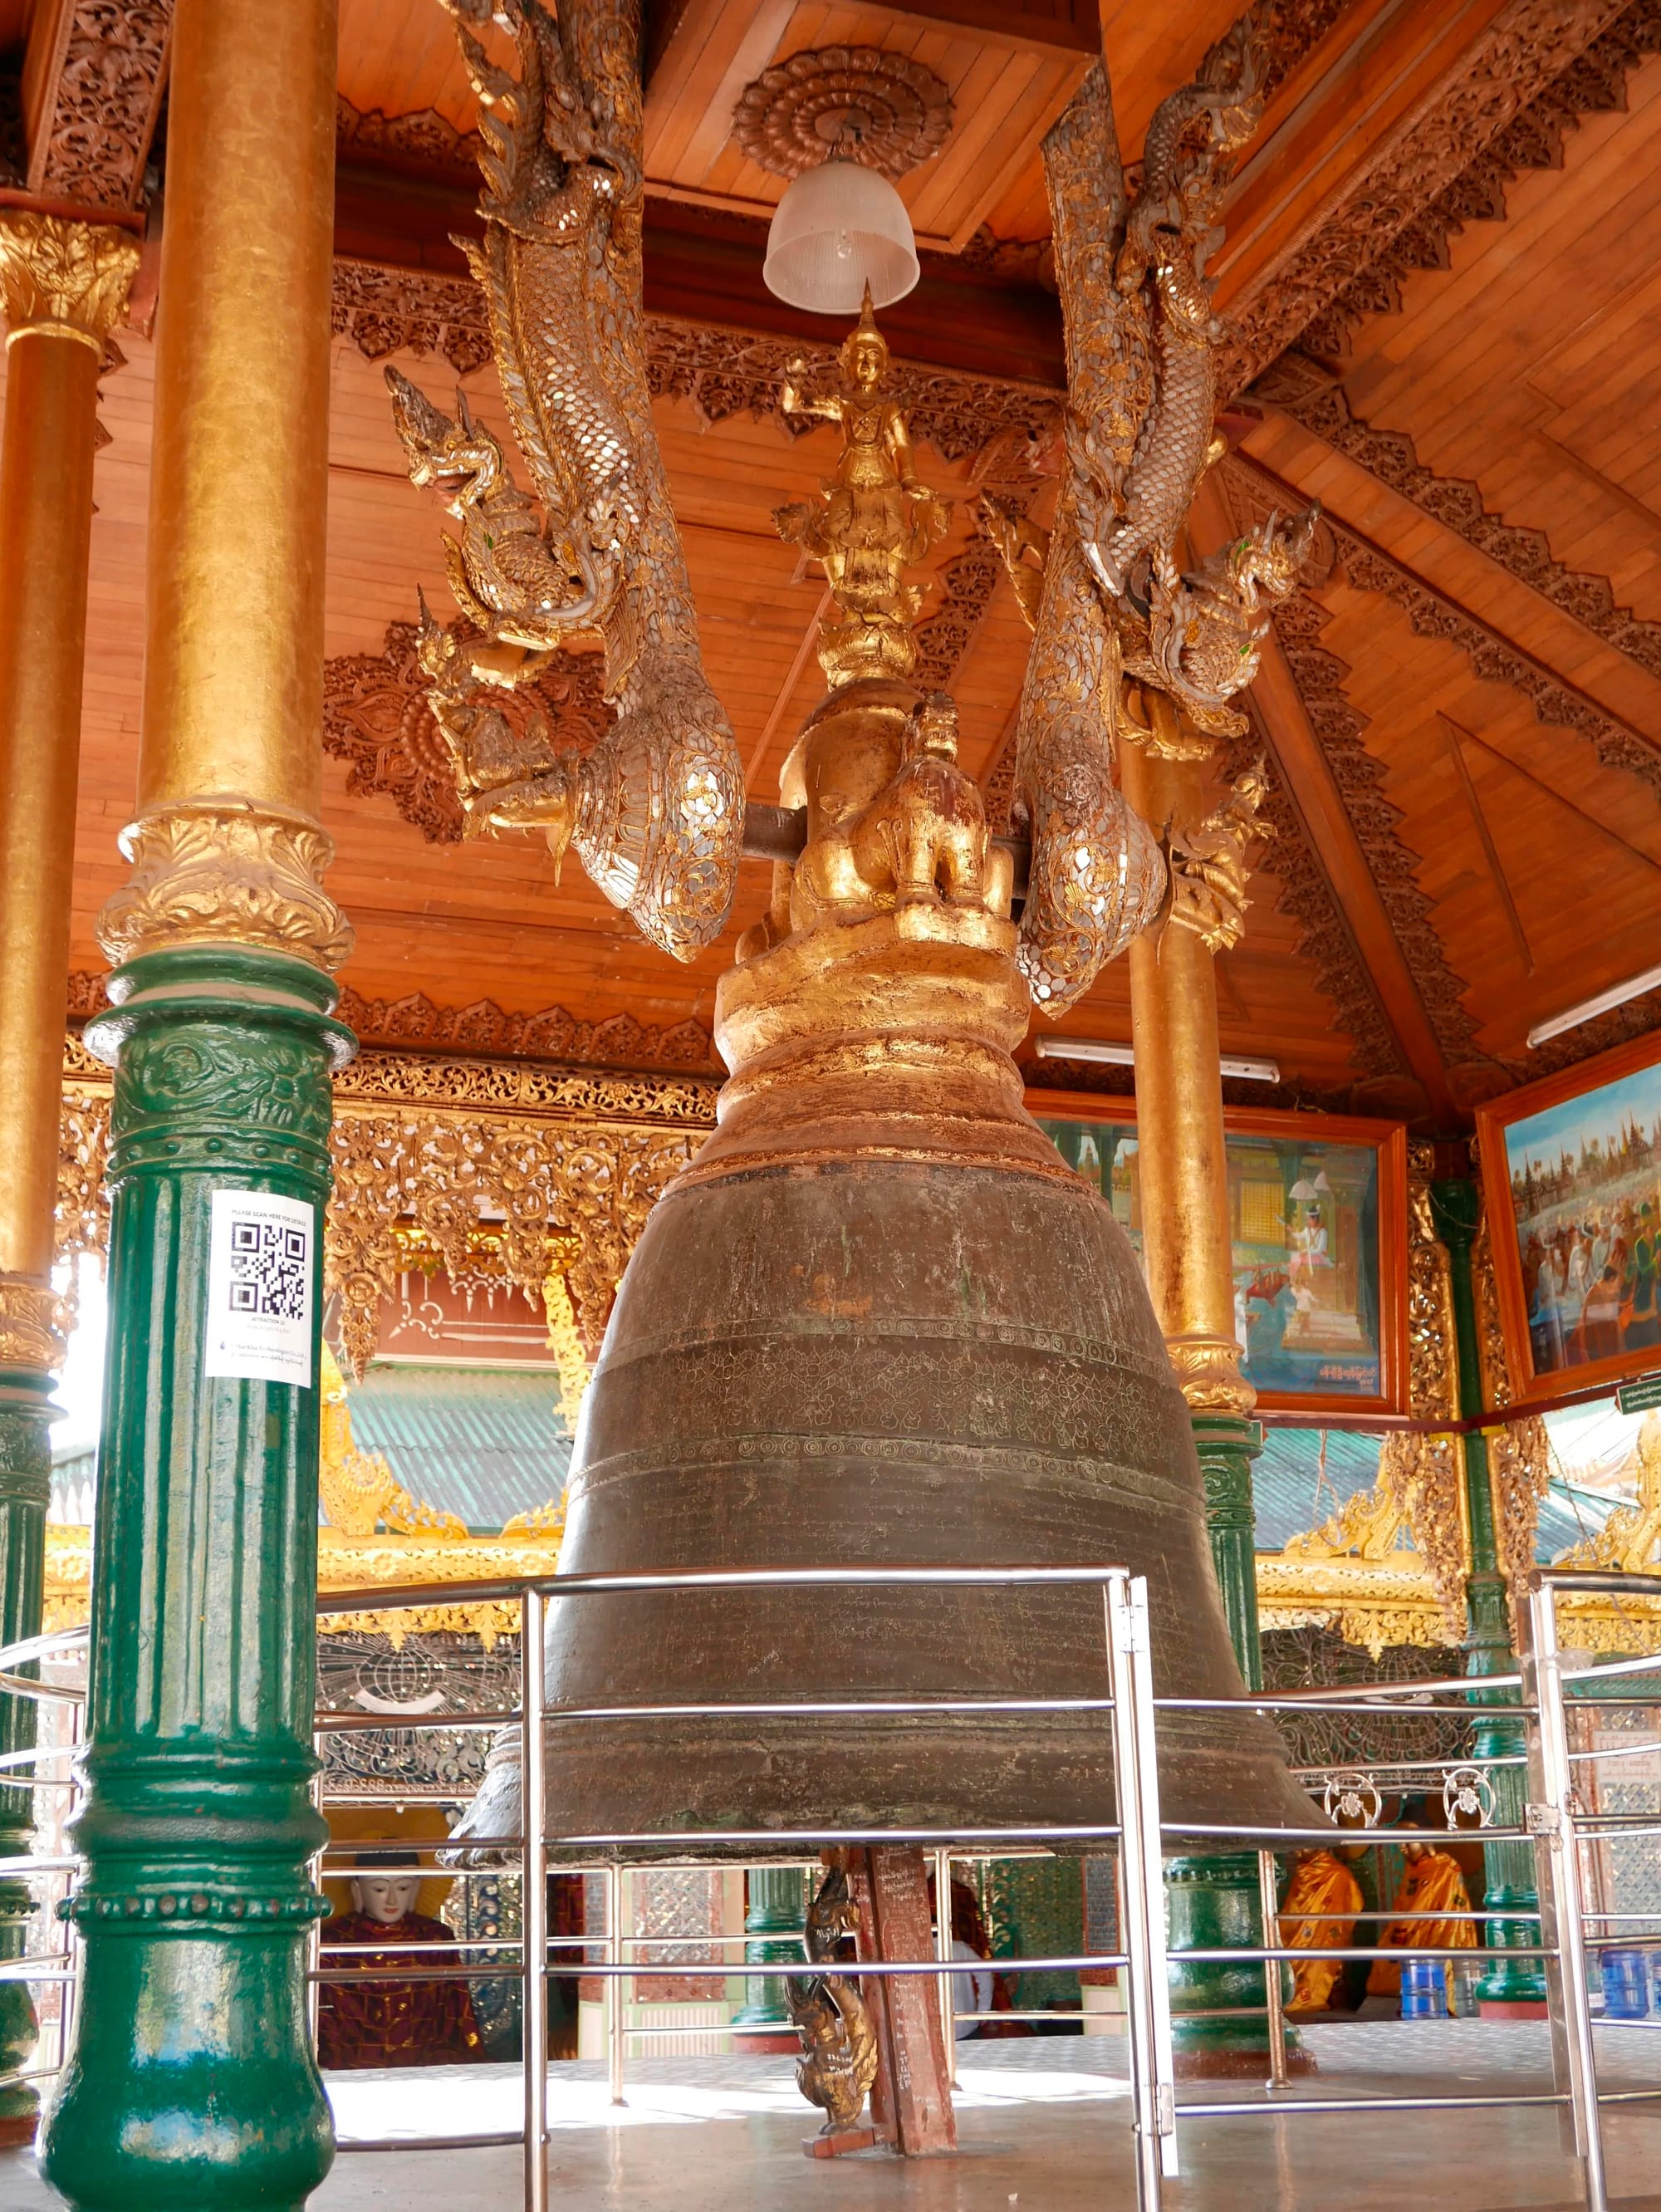 Photo by Author — a large bell at the Shwedagon Pagoda